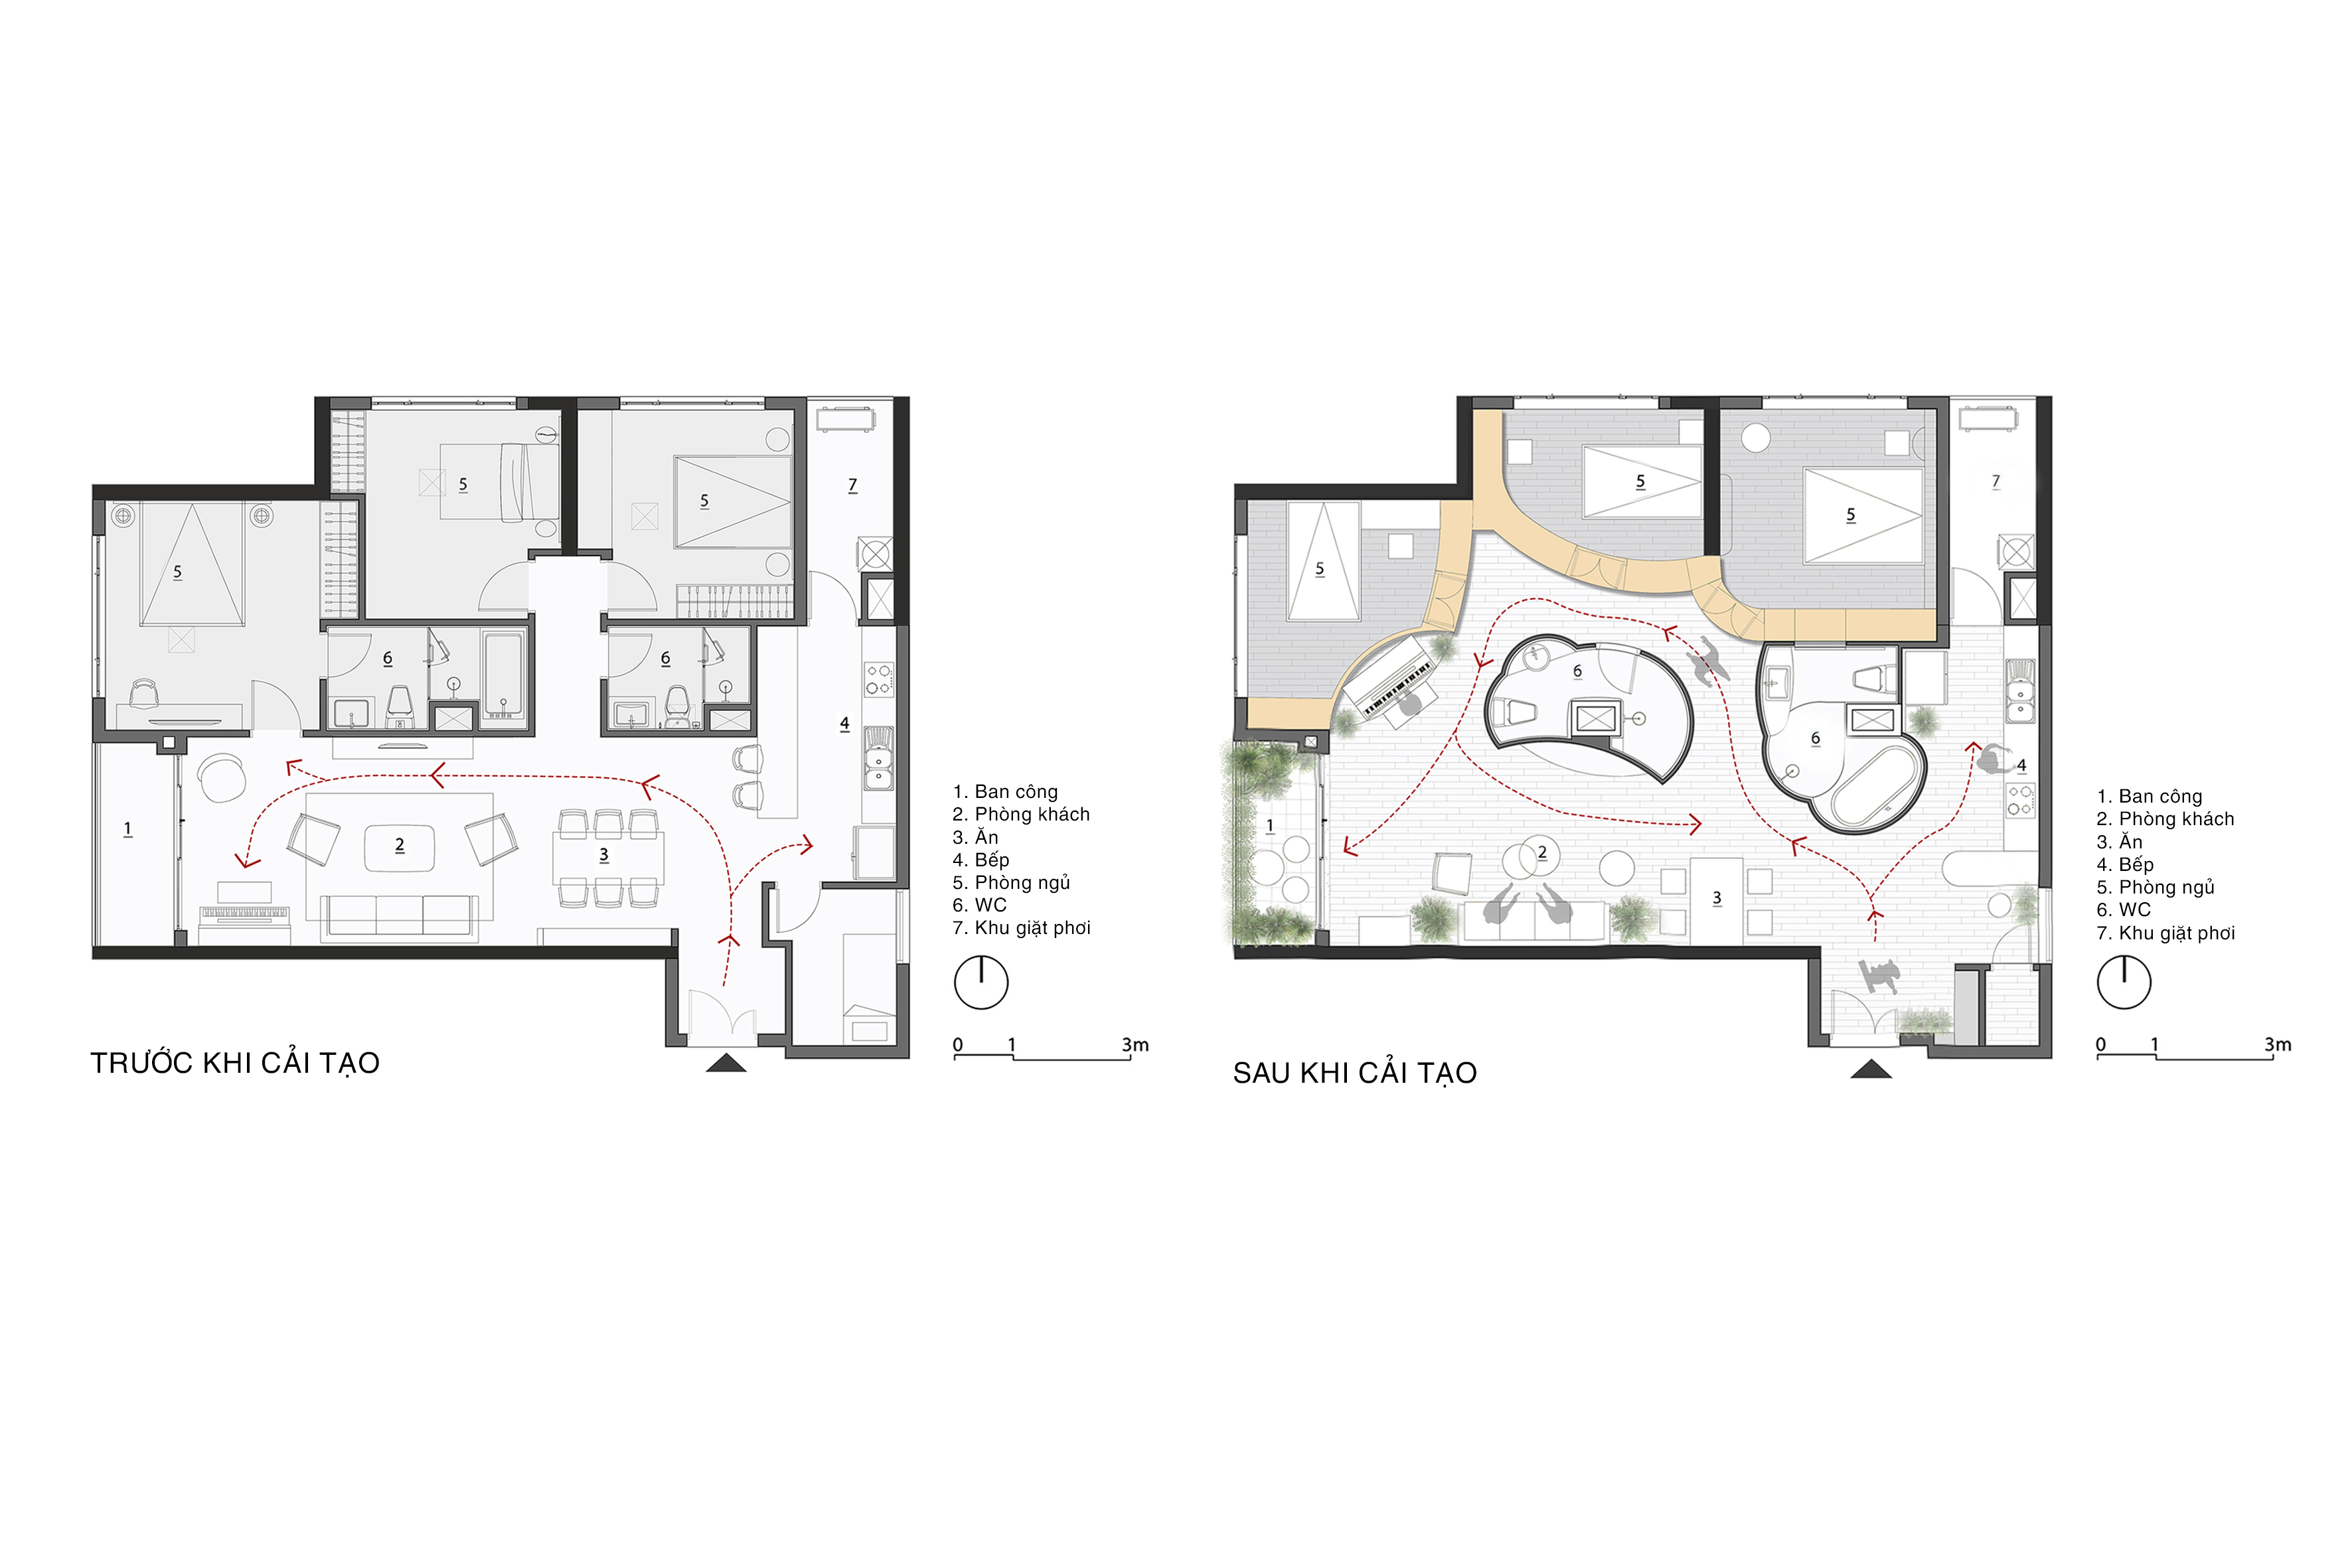 Plan - Before and After Renovation